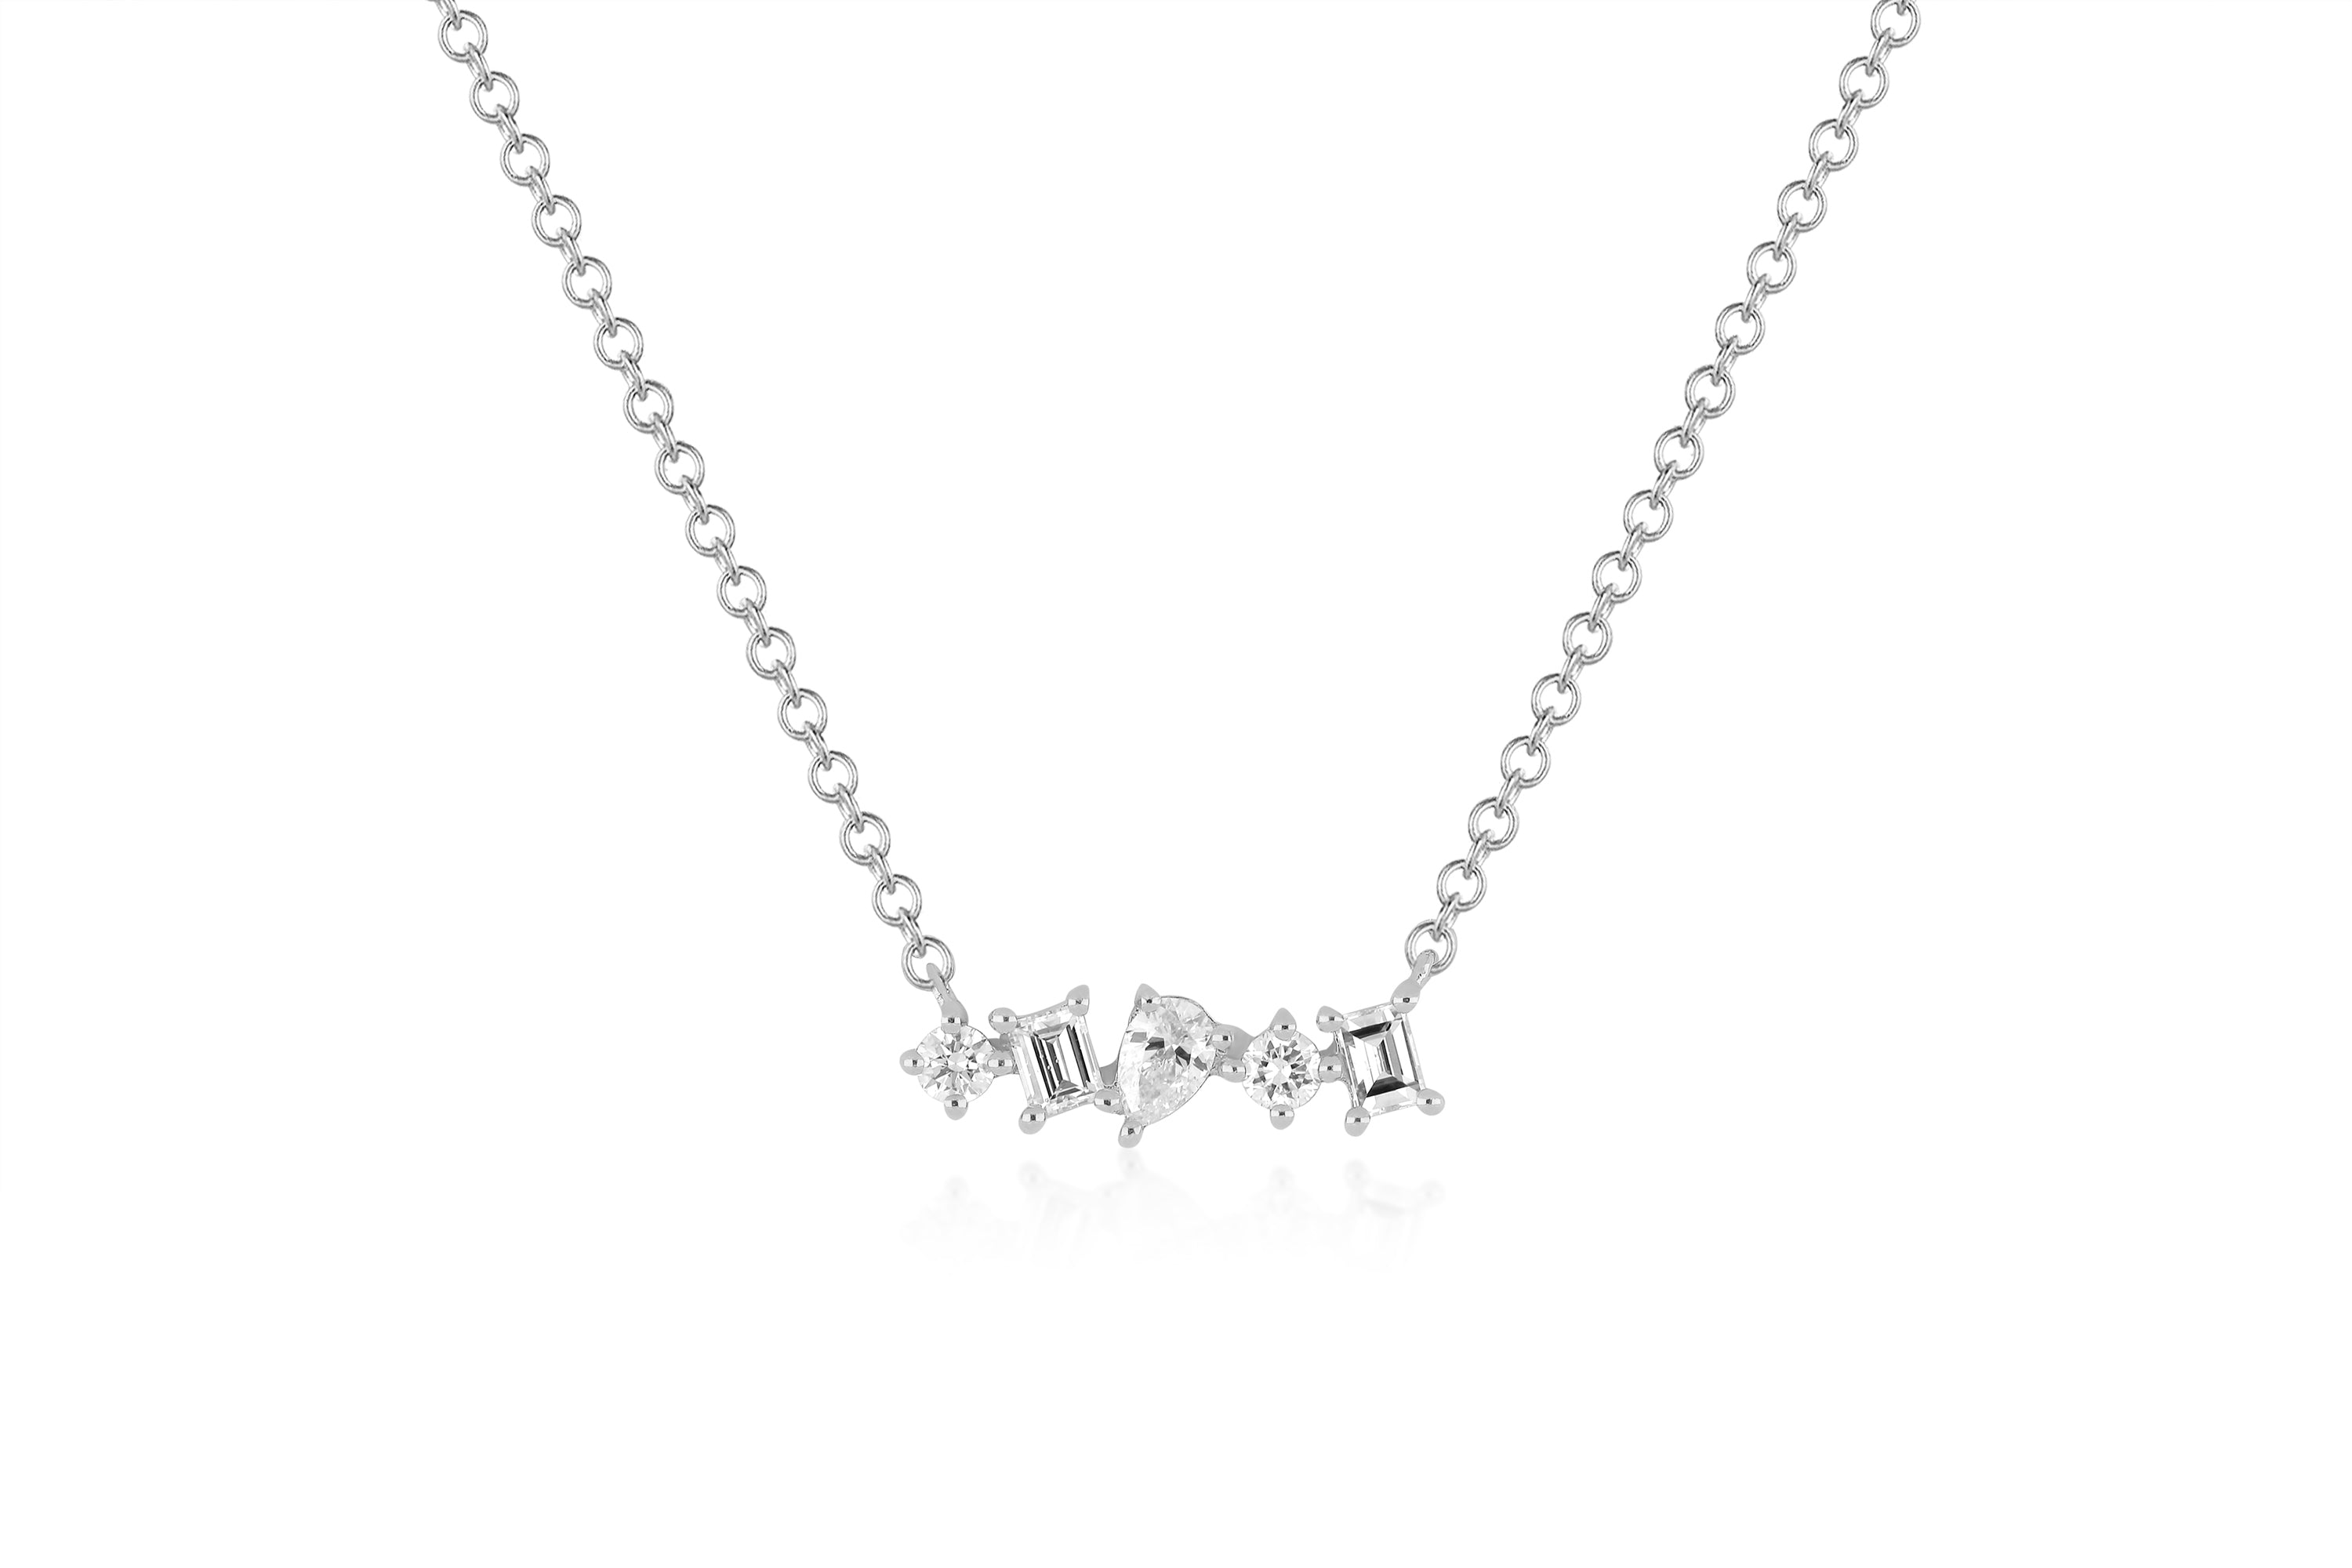 Diamond Multifaceted Mini Bar Necklace in 14k white gold